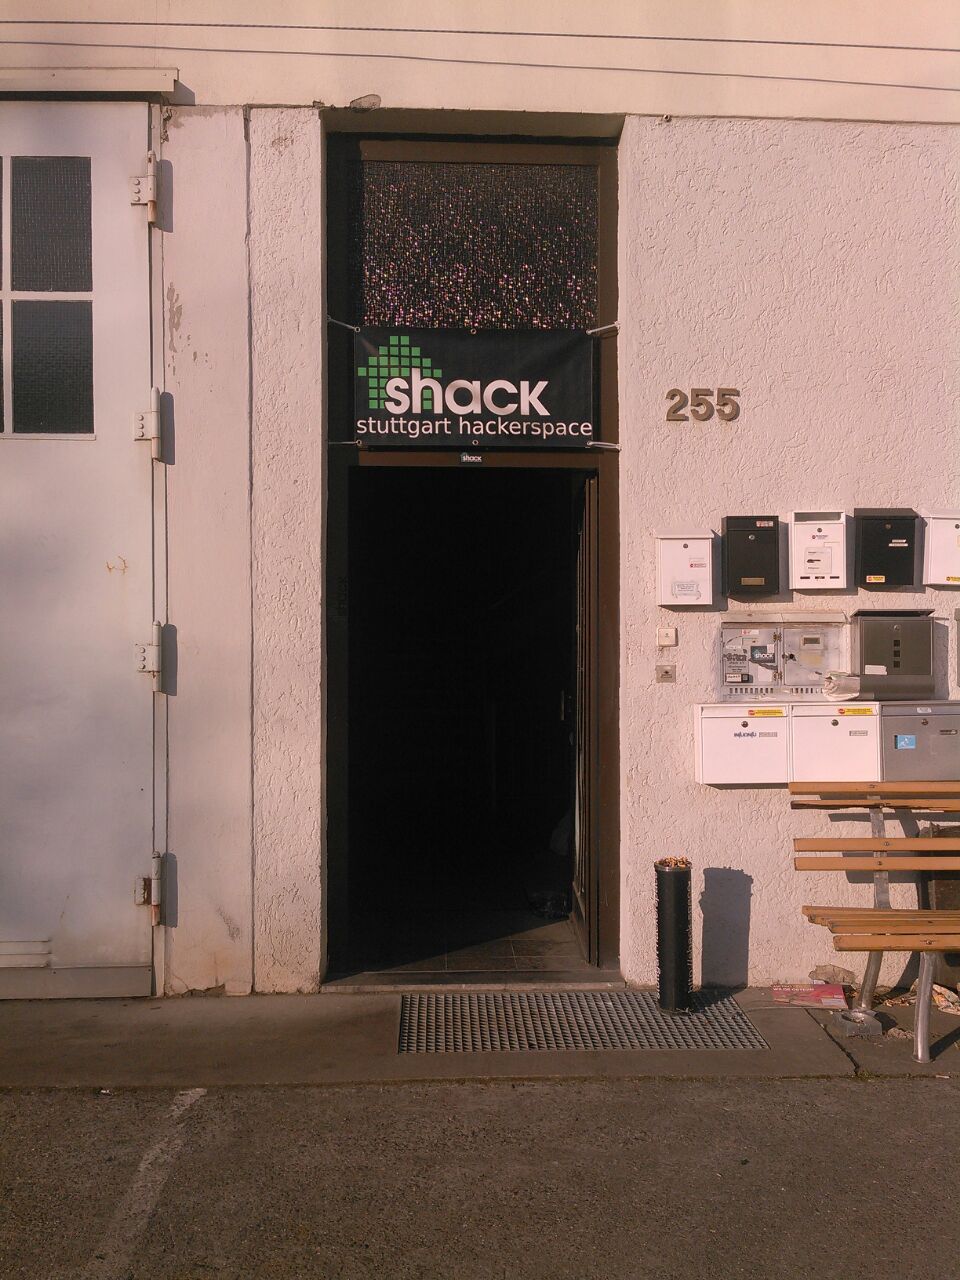 Entry to the shackspace